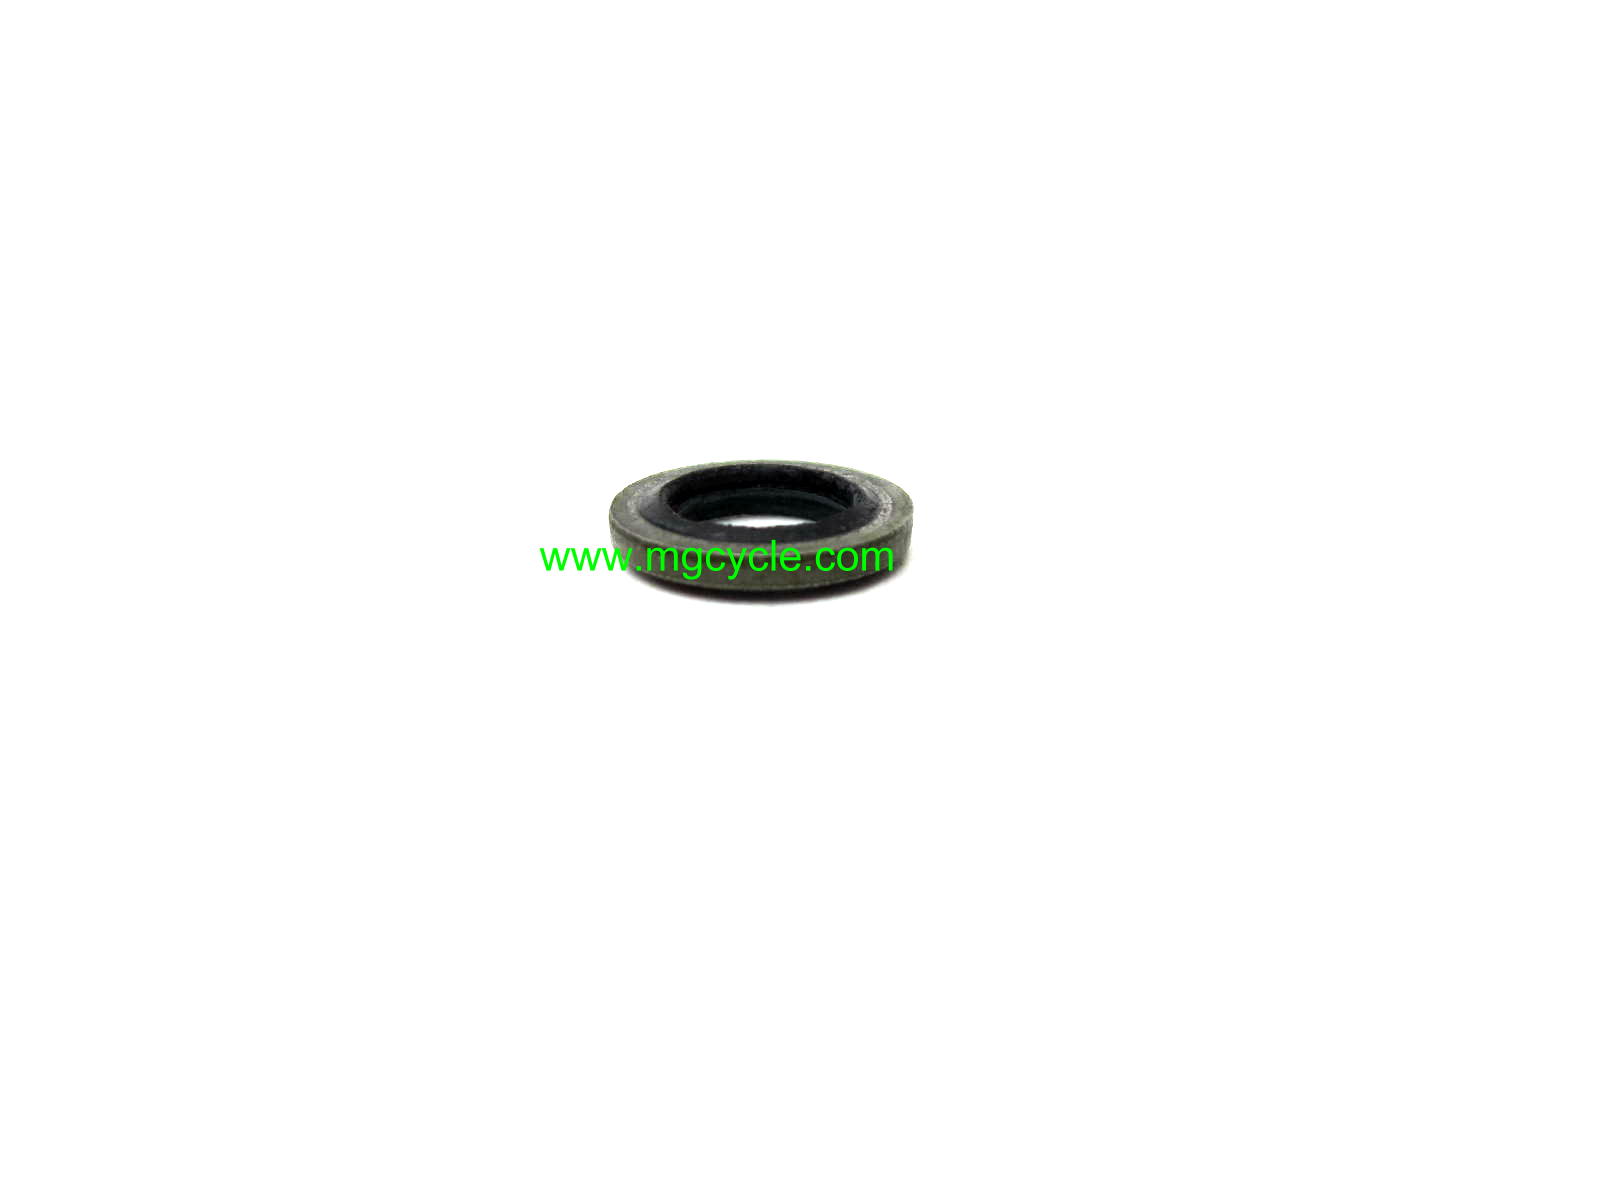 8mm seal washer with rubber center sub for GU12154200 - Click Image to Close